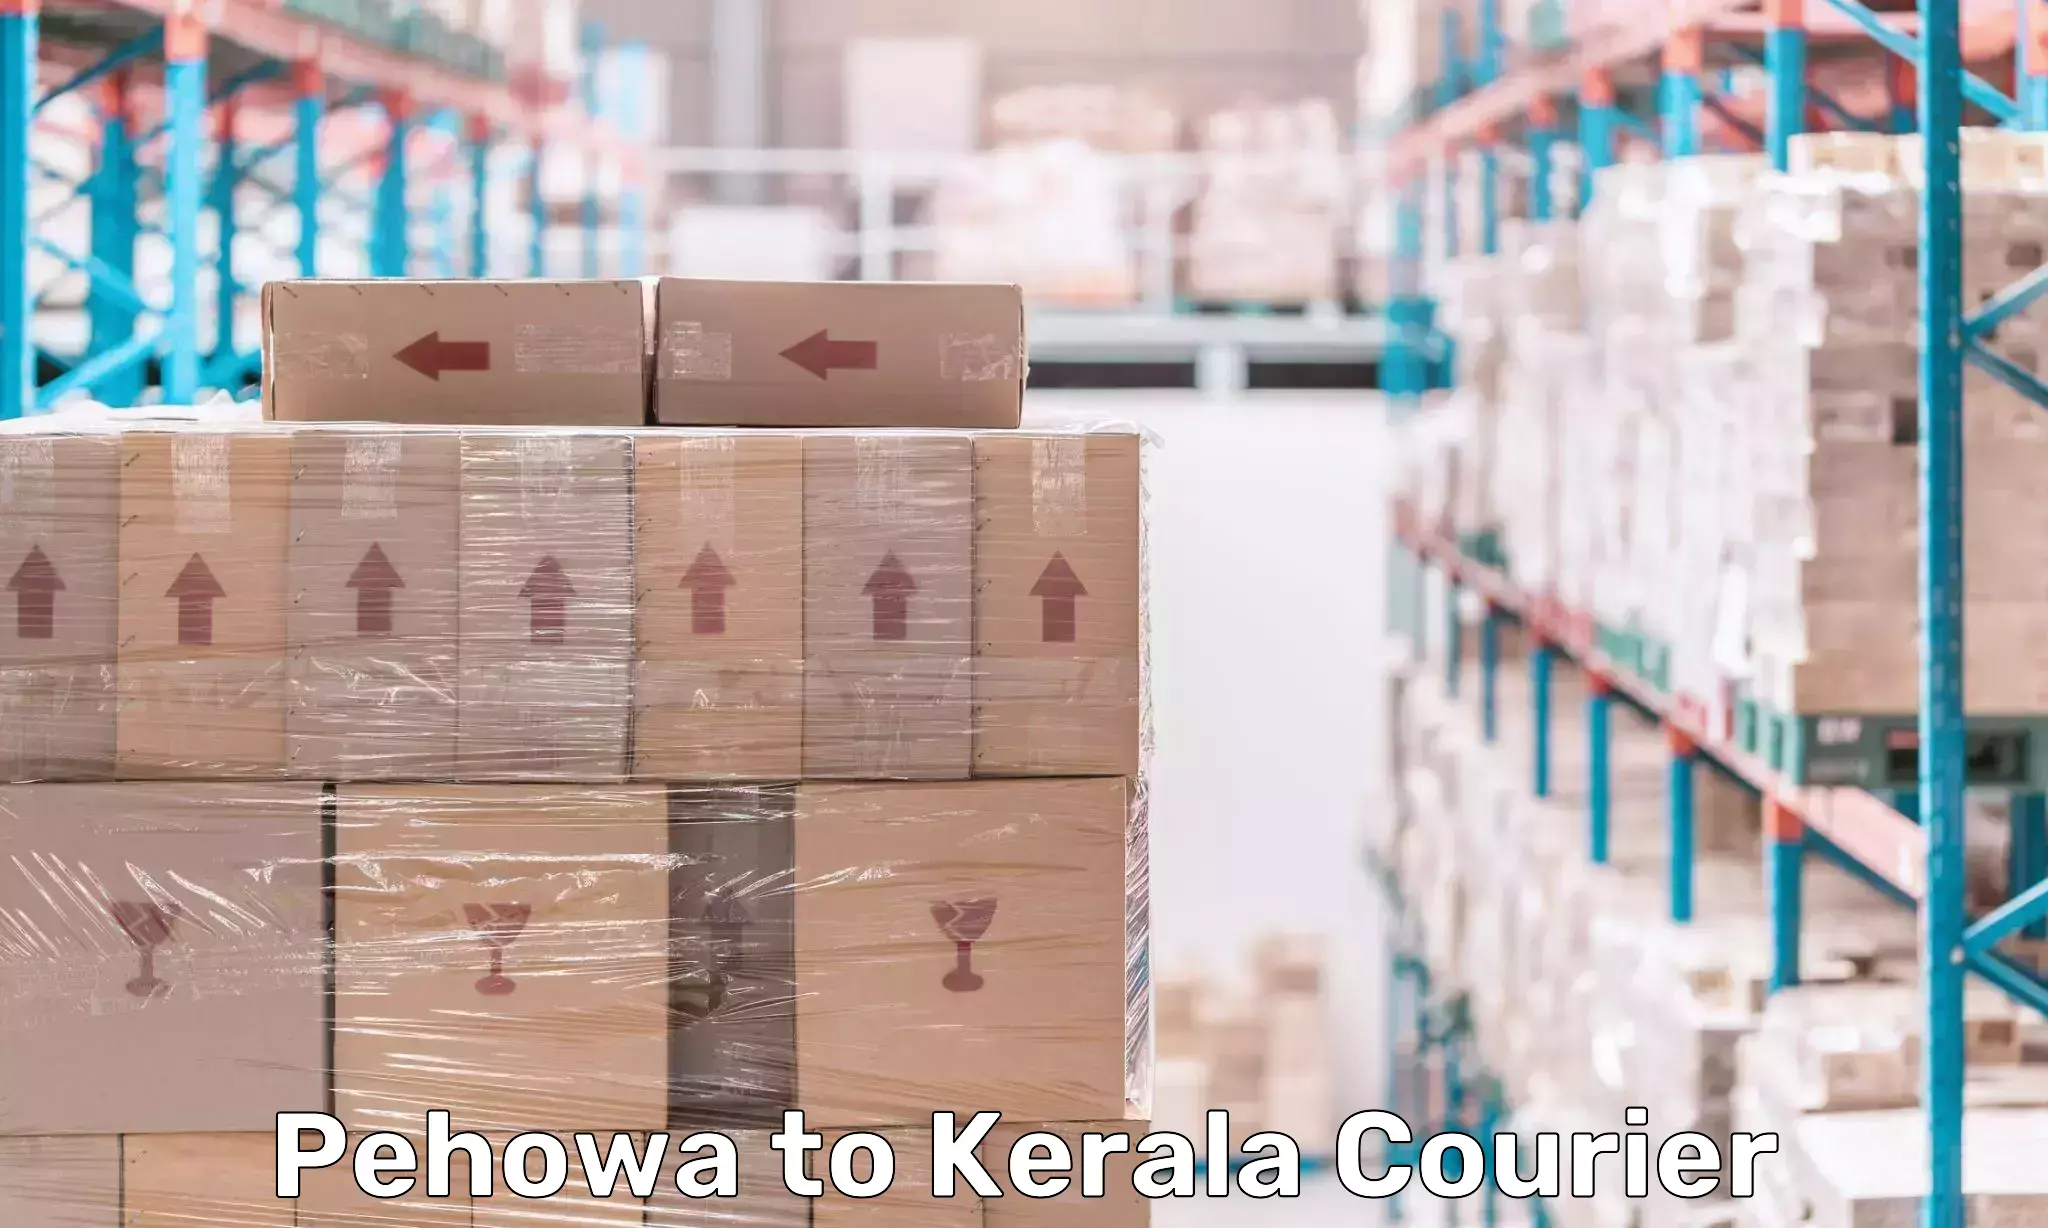 State-of-the-art courier technology in Pehowa to Karunagappally